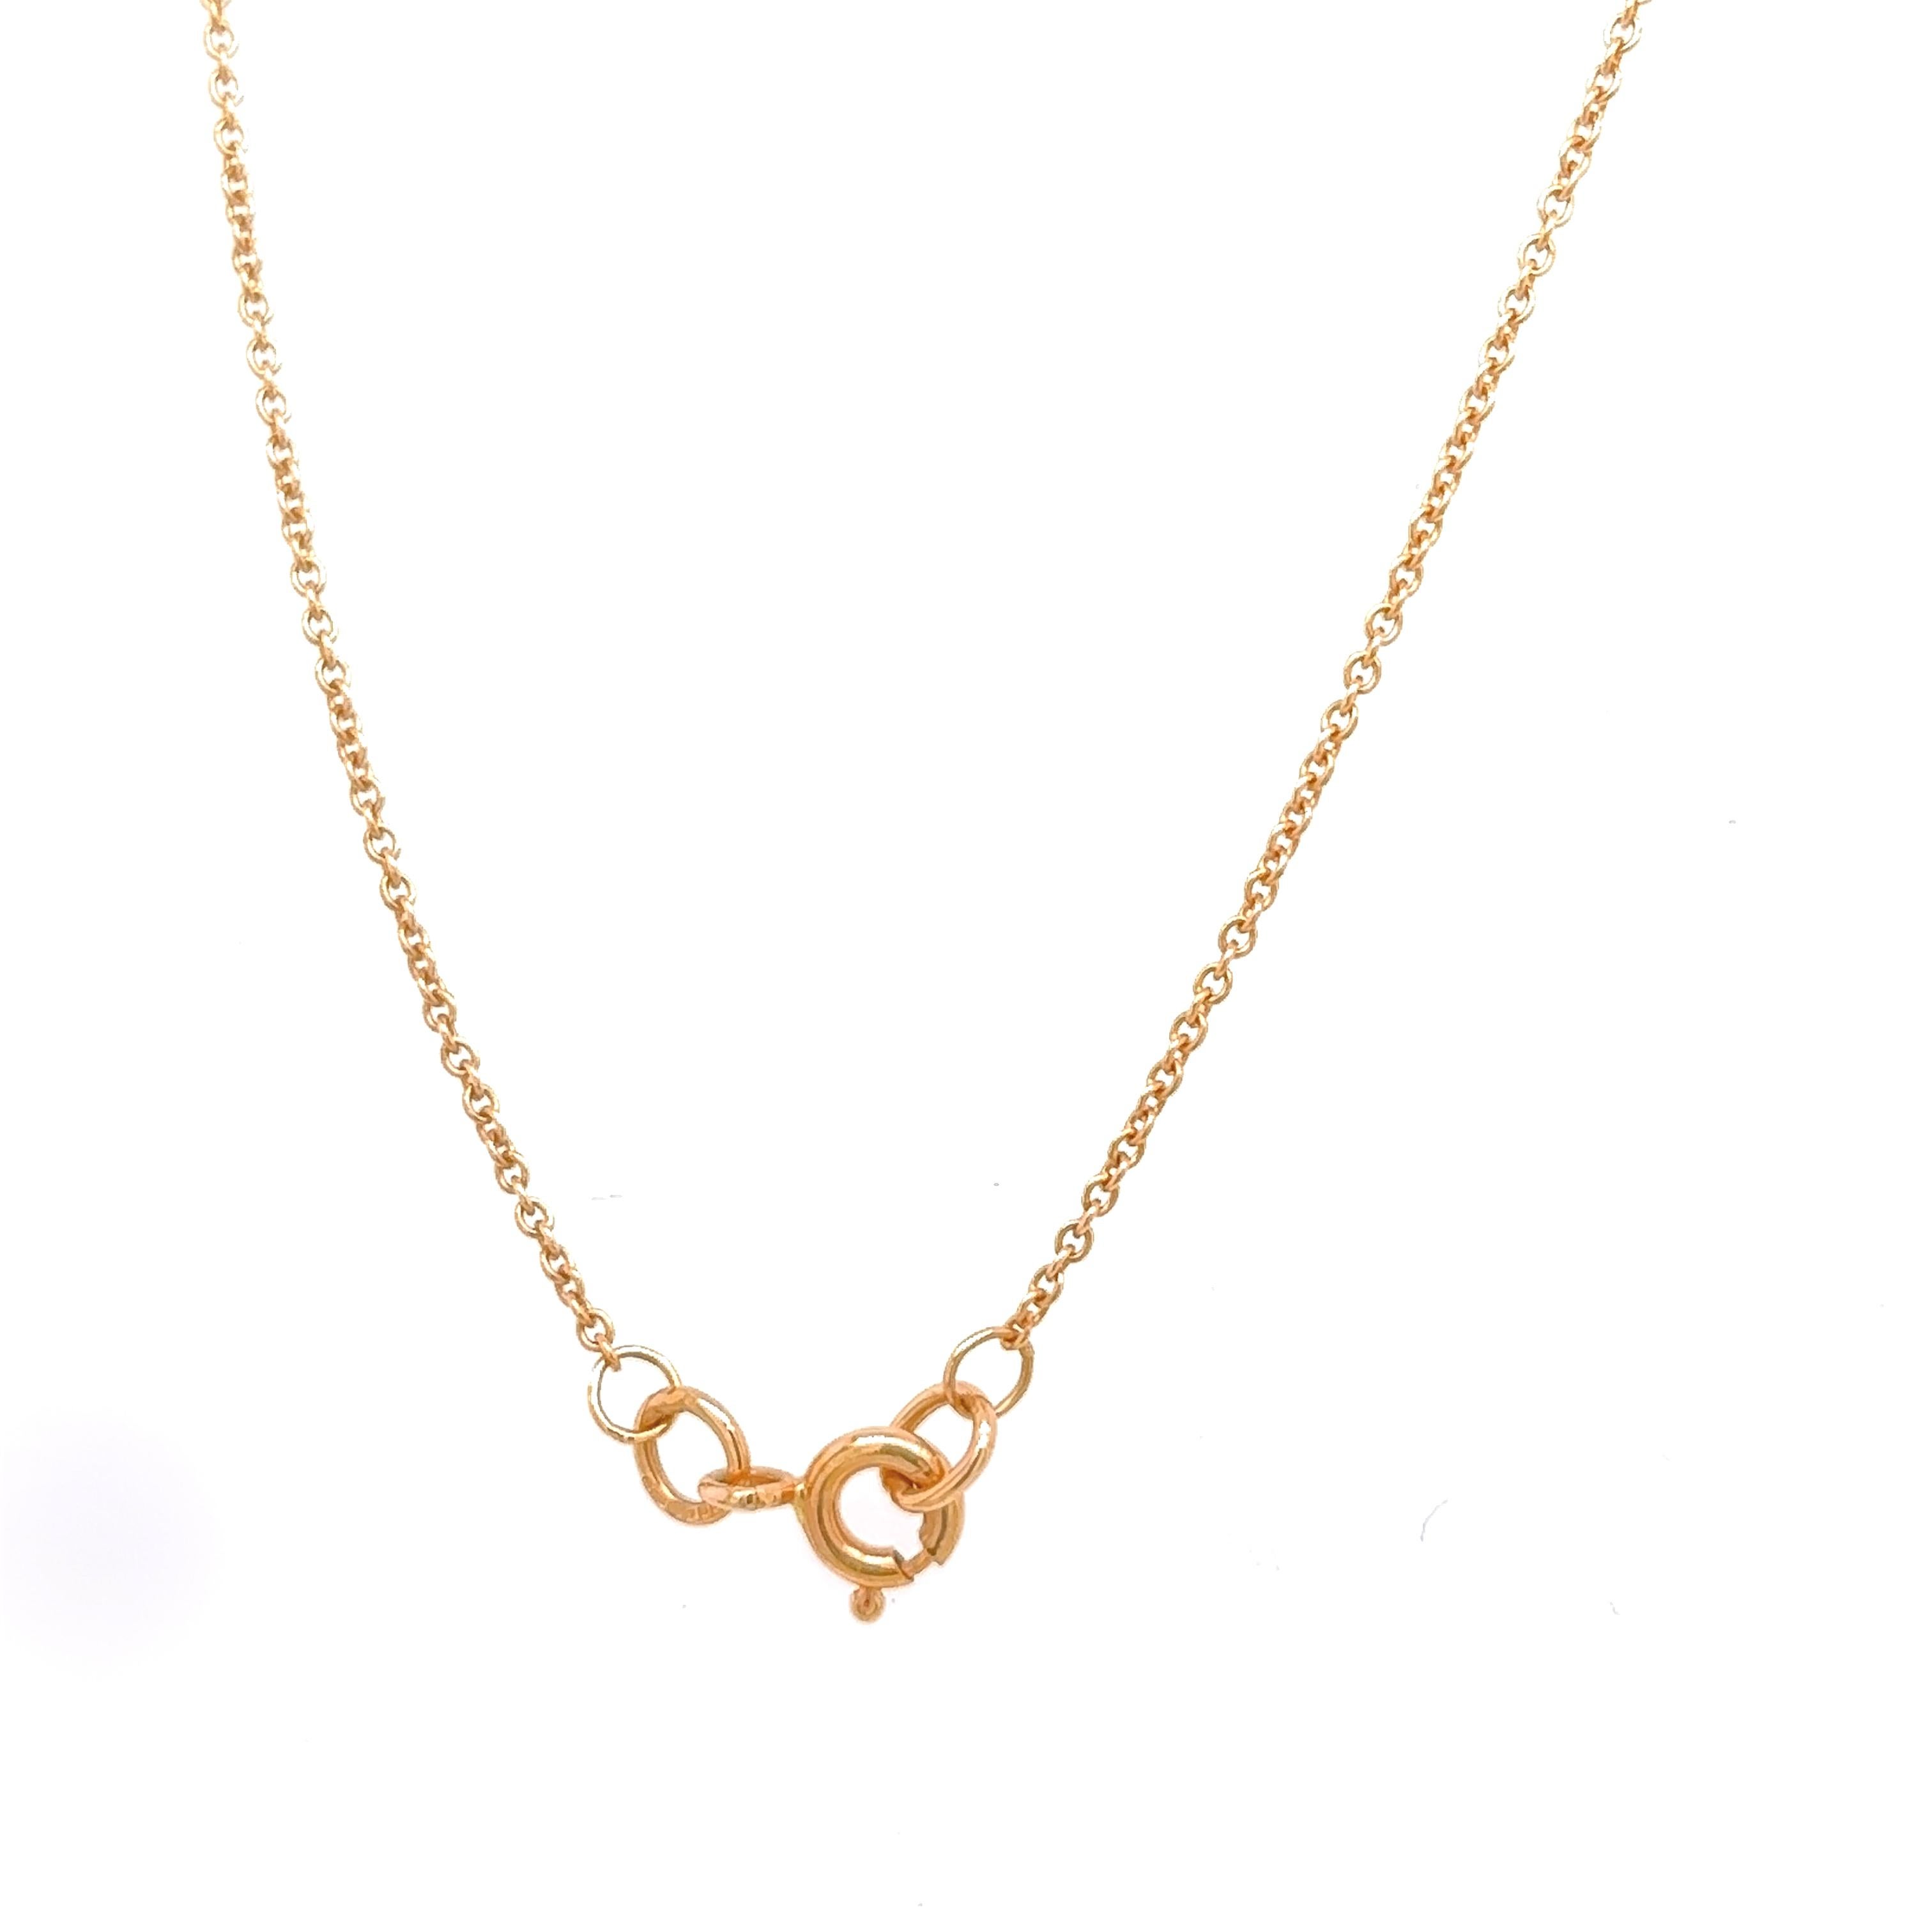 Fine Quality 0.20ct Diamond Baguette Necklace in 18ct Rose Gold In New Condition For Sale In London, GB